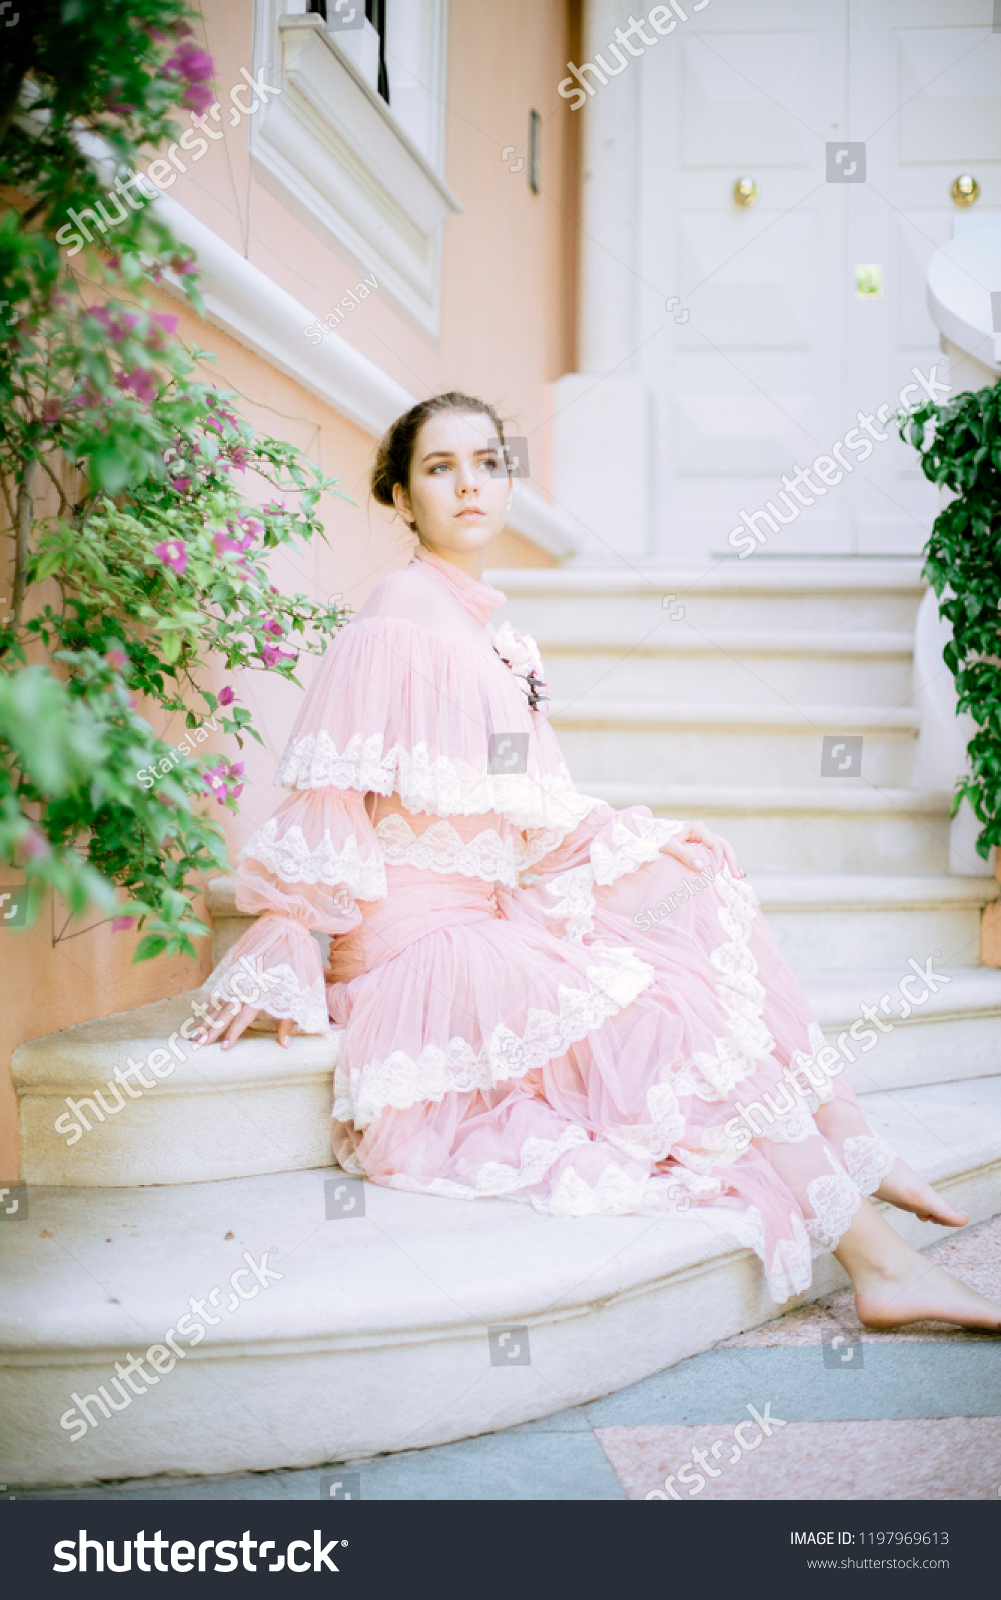 https://image.shutterstock.com/z/stock-photo-very-beautiful-young-girl-with-blond-hair-with-a-nominal-transparent-pink-dress-on-the-background-1197969613.jpg